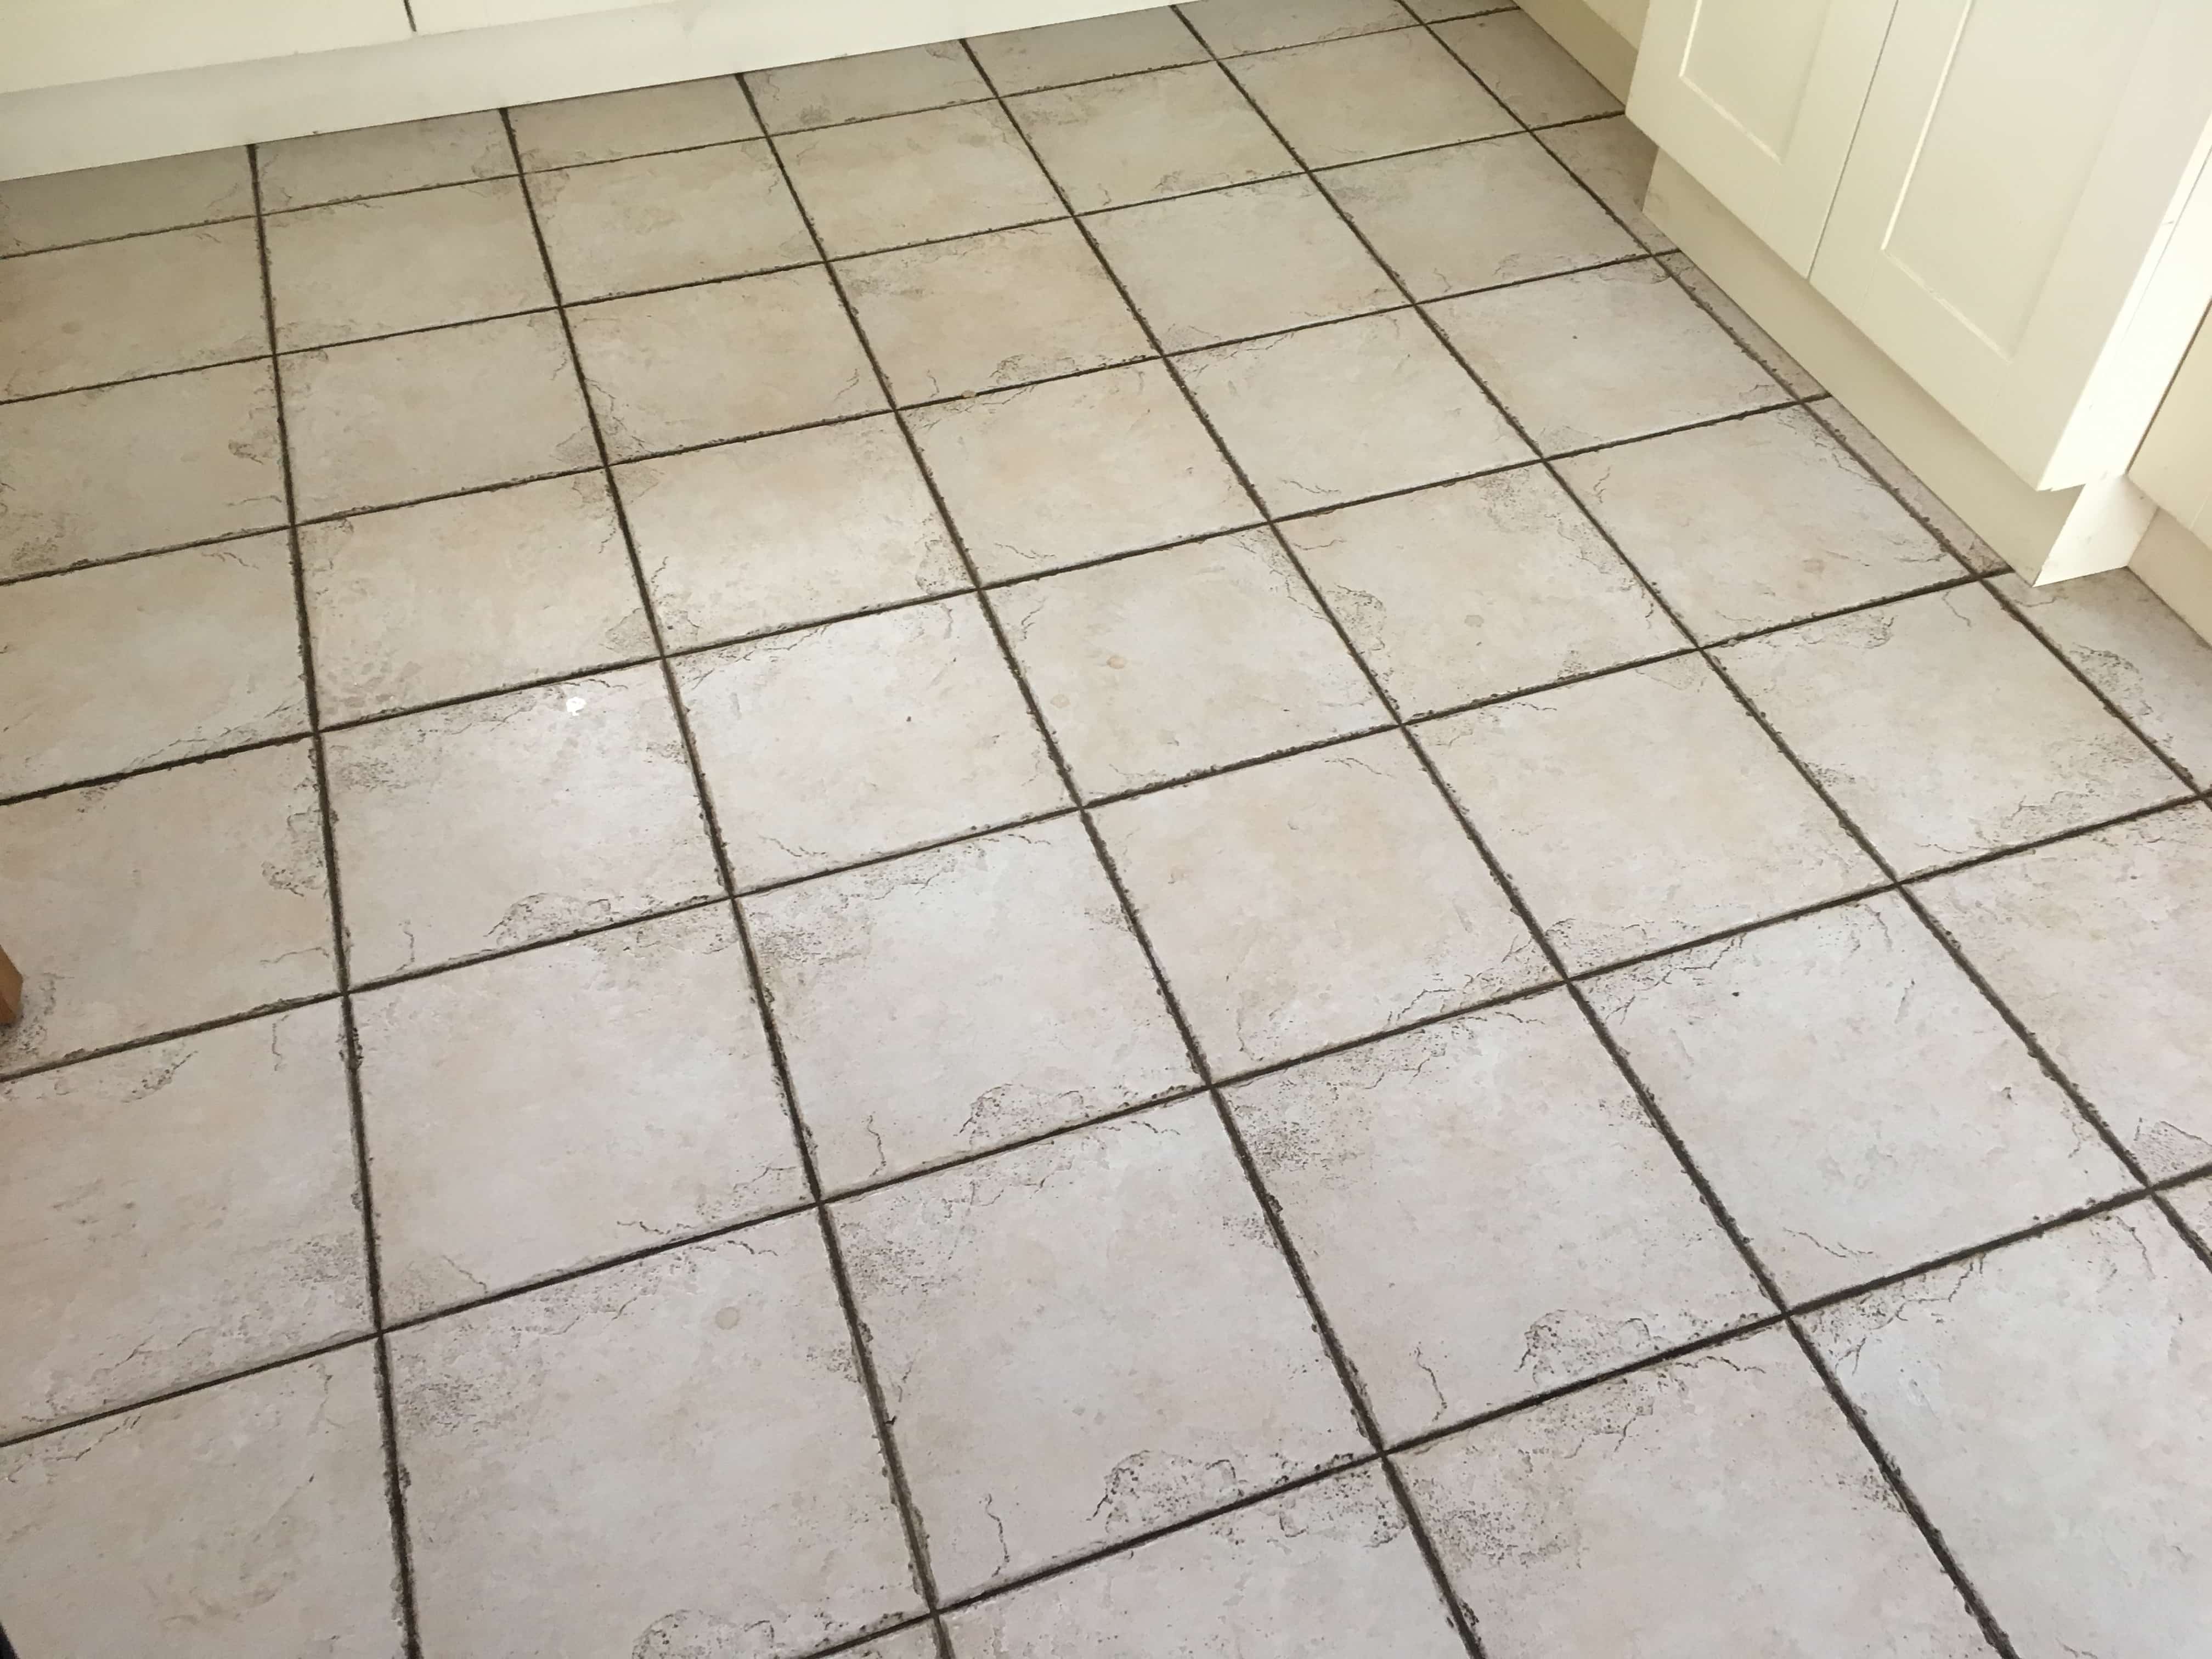 Deep Cleaning Ceramic Tile And Grout In A Leatherhead Kitchen